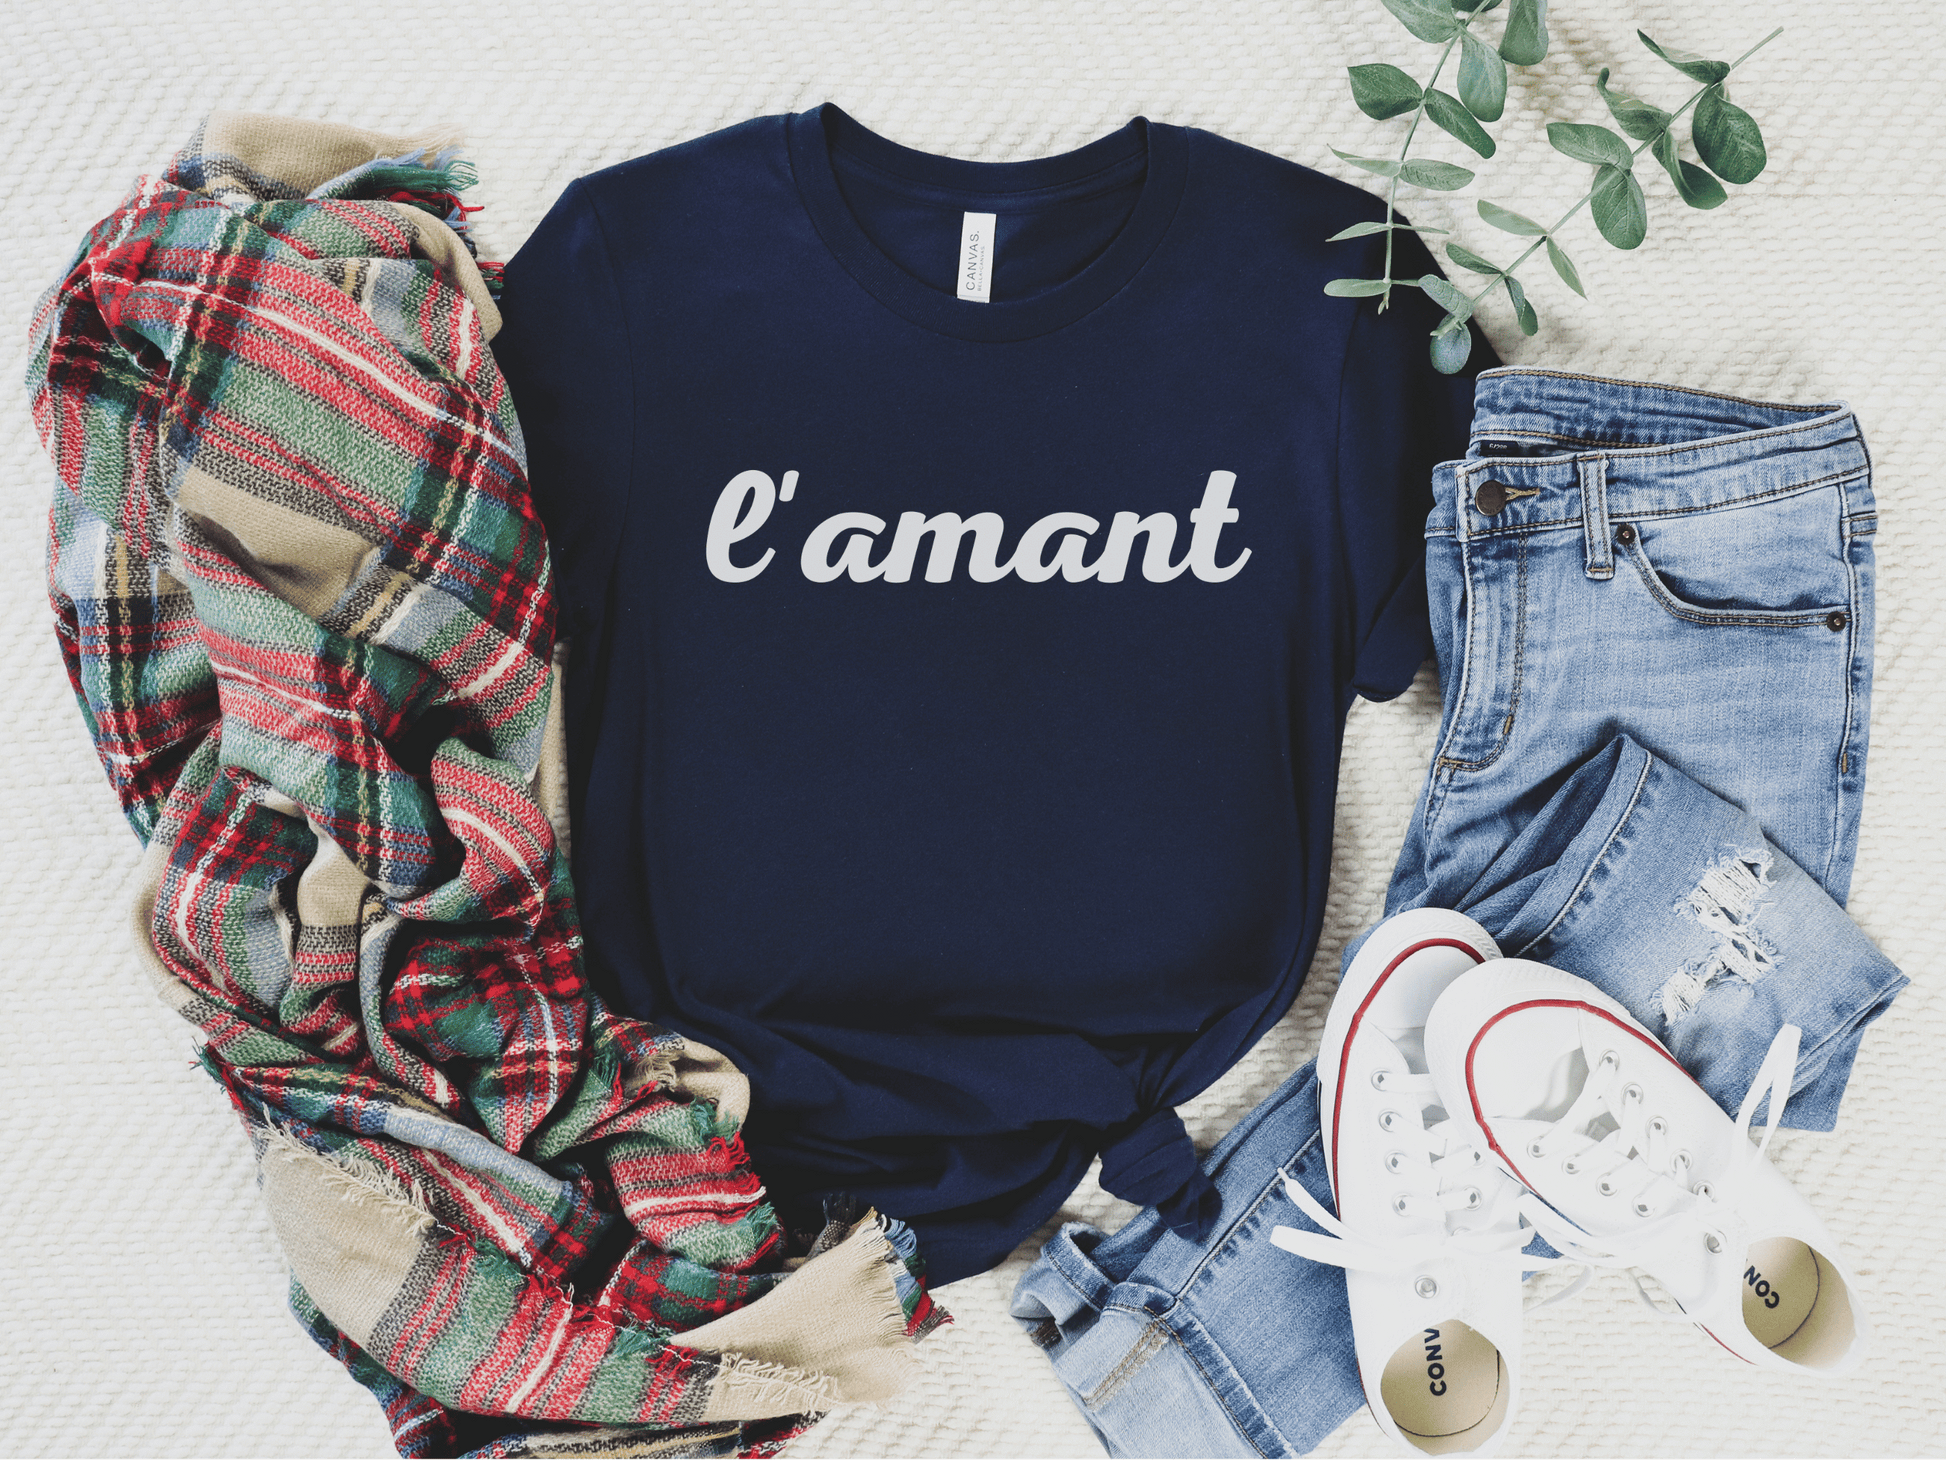 L'amant T-Shirt in Navy